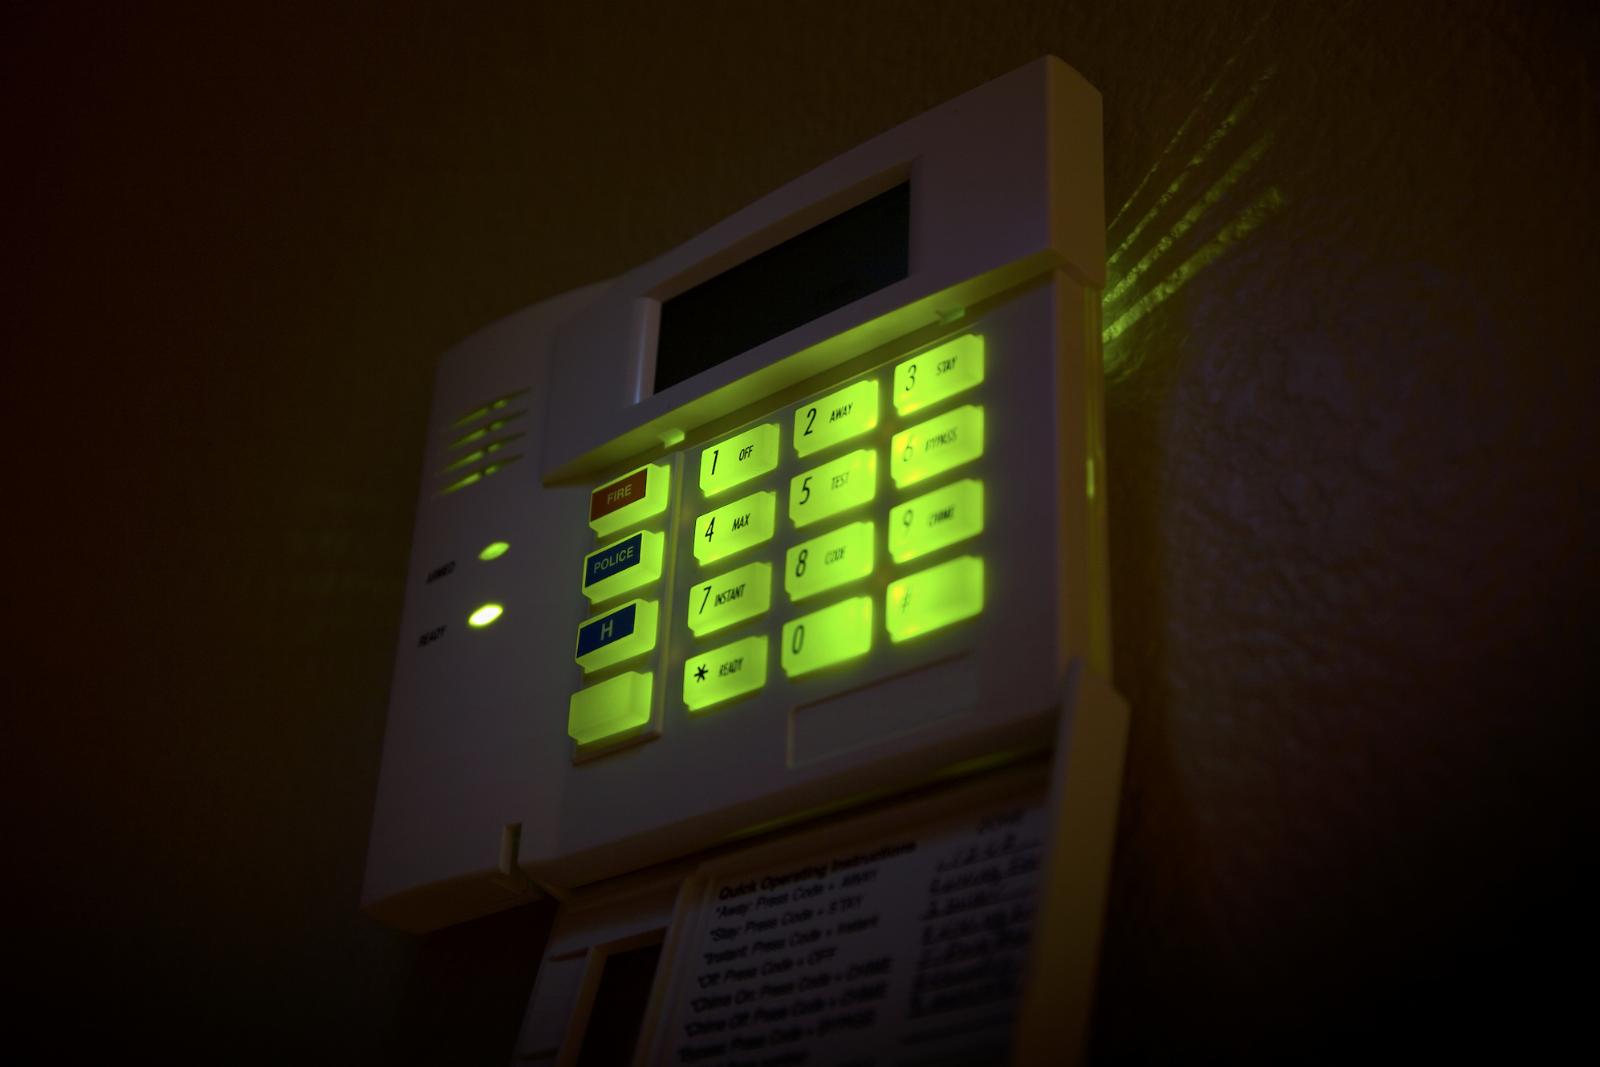 A simple bug exposed access to thousands of smart security alarm systems